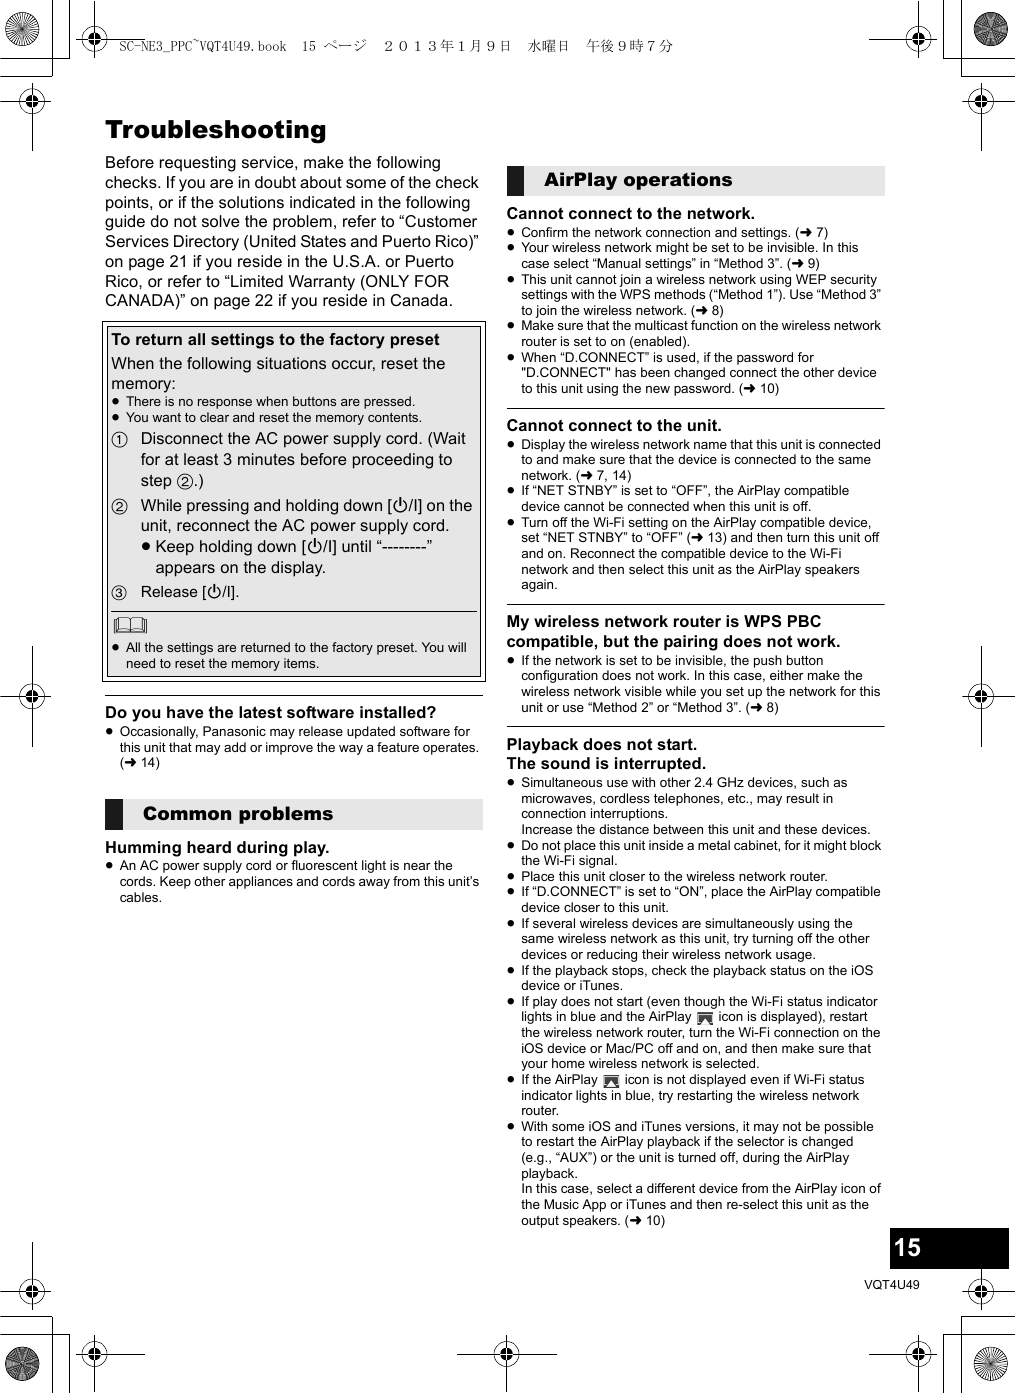 15VQT4U49TroubleshootingBefore requesting service, make the following checks. If you are in doubt about some of the check points, or if the solutions indicated in the following guide do not solve the problem, refer to “Customer Services Directory (United States and Puerto Rico)” on page 21 if you reside in the U.S.A. or Puerto Rico, or refer to “Limited Warranty (ONLY FOR CANADA)” on page 22 if you reside in Canada.Do you have the latest software installed?≥Occasionally, Panasonic may release updated software for this unit that may add or improve the way a feature operates. (l14)Humming heard during play.≥An AC power supply cord or fluorescent light is near the cords. Keep other appliances and cords away from this unit’s cables.Cannot connect to the network.≥Confirm the network connection and settings. (l7)≥Your wireless network might be set to be invisible. In this case select “Manual settings” in “Method 3”. (l9)≥This unit cannot join a wireless network using WEP security settings with the WPS methods (“Method 1”). Use “Method 3” to join the wireless network. (l8)≥Make sure that the multicast function on the wireless network router is set to on (enabled).≥When “D.CONNECT” is used, if the password for &quot;D.CONNECT&quot; has been changed connect the other device to this unit using the new password. (l10)Cannot connect to the unit.≥Display the wireless network name that this unit is connected to and make sure that the device is connected to the same network. (l7, 14)≥If “NET STNBY” is set to “OFF”, the AirPlay compatible device cannot be connected when this unit is off.≥Turn off the Wi-Fi setting on the AirPlay compatible device, set “NET STNBY” to “OFF” (l13) and then turn this unit off and on. Reconnect the compatible device to the Wi-Fi network and then select this unit as the AirPlay speakers again.My wireless network router is WPS PBC compatible, but the pairing does not work.≥If the network is set to be invisible, the push button configuration does not work. In this case, either make the wireless network visible while you set up the network for this unit or use “Method 2” or “Method 3”. (l8)Playback does not start.The sound is interrupted.≥Simultaneous use with other 2.4 GHz devices, such as microwaves, cordless telephones, etc., may result in connection interruptions.Increase the distance between this unit and these devices.≥Do not place this unit inside a metal cabinet, for it might block the Wi-Fi signal.≥Place this unit closer to the wireless network router.≥If “D.CONNECT” is set to “ON”, place the AirPlay compatible device closer to this unit.≥If several wireless devices are simultaneously using the same wireless network as this unit, try turning off the other devices or reducing their wireless network usage.≥If the playback stops, check the playback status on the iOS device or iTunes.≥If play does not start (even though the Wi-Fi status indicator lights in blue and the AirPlay   icon is displayed), restart the wireless network router, turn the Wi-Fi connection on the iOS device or Mac/PC off and on, and then make sure that your home wireless network is selected.≥If the AirPlay   icon is not displayed even if Wi-Fi status indicator lights in blue, try restarting the wireless network router.≥With some iOS and iTunes versions, it may not be possible to restart the AirPlay playback if the selector is changed (e.g., “AUX”) or the unit is turned off, during the AirPlay playback.In this case, select a different device from the AirPlay icon of the Music App or iTunes and then re-select this unit as the output speakers. (l10)To return all settings to the factory presetWhen the following situations occur, reset the memory:≥There is no response when buttons are pressed.≥You want to clear and reset the memory contents.1Disconnect the AC power supply cord. (Wait for at least 3 minutes before proceeding to step 2.)2While pressing and holding down [Í/I] on the unit, reconnect the AC power supply cord.≥Keep holding down [Í/I] until “--------” appears on the display.3Release [Í/I].≥All the settings are returned to the factory preset. You will need to reset the memory items.Common problemsAirPlay operationsSC-NE3_PPC~VQT4U49.book  15 ページ  ２０１３年１月９日　水曜日　午後９時７分